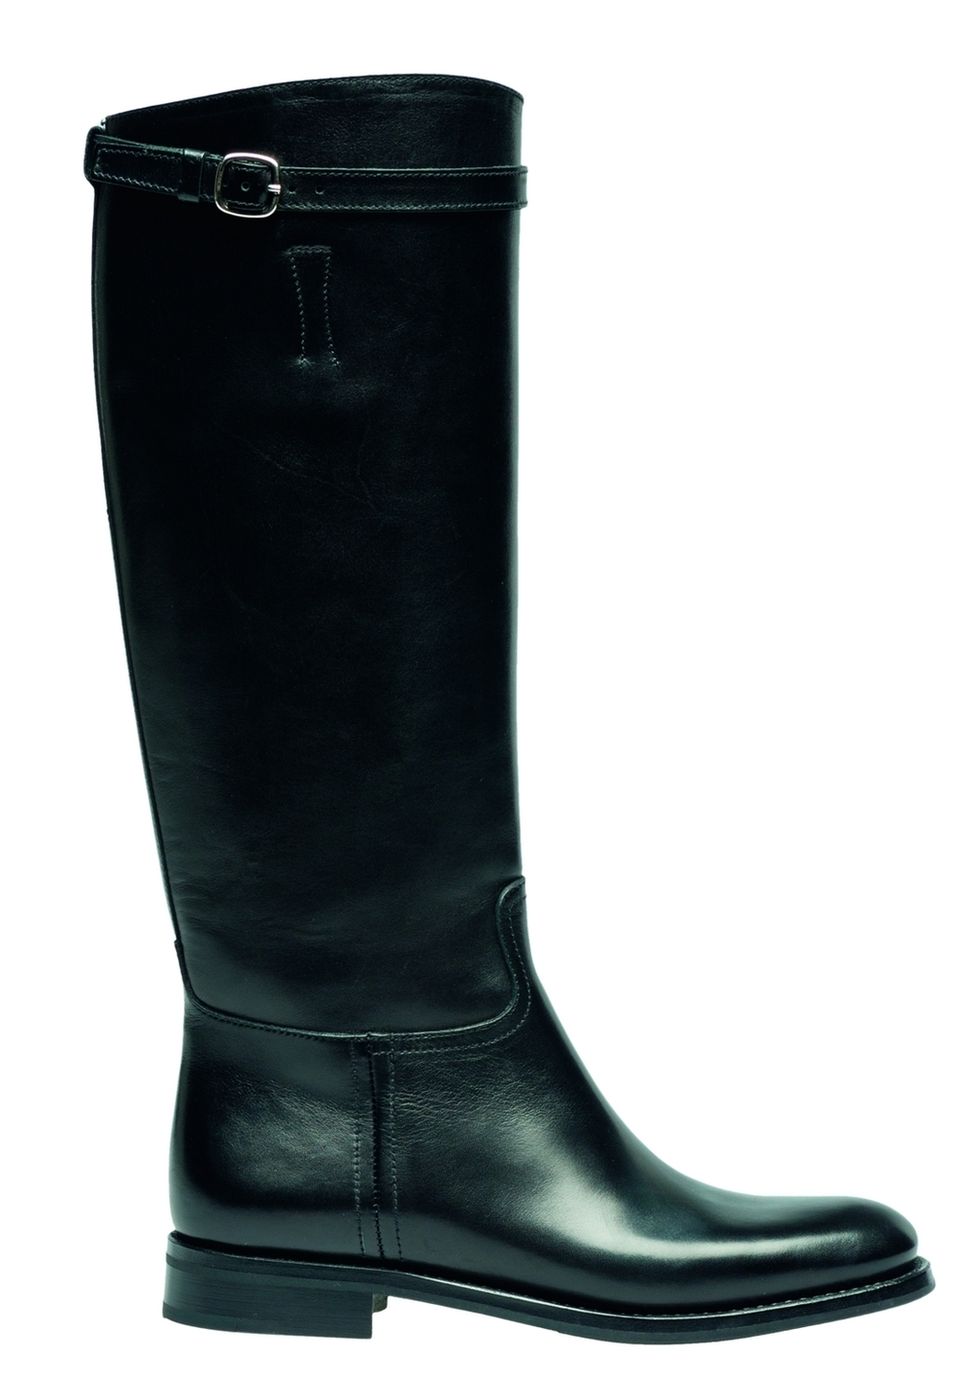 Boot, Riding boot, Leather, Knee-high boot, Rain boot, Cylinder, Work boots, Motorcycle boot, Synthetic rubber, 